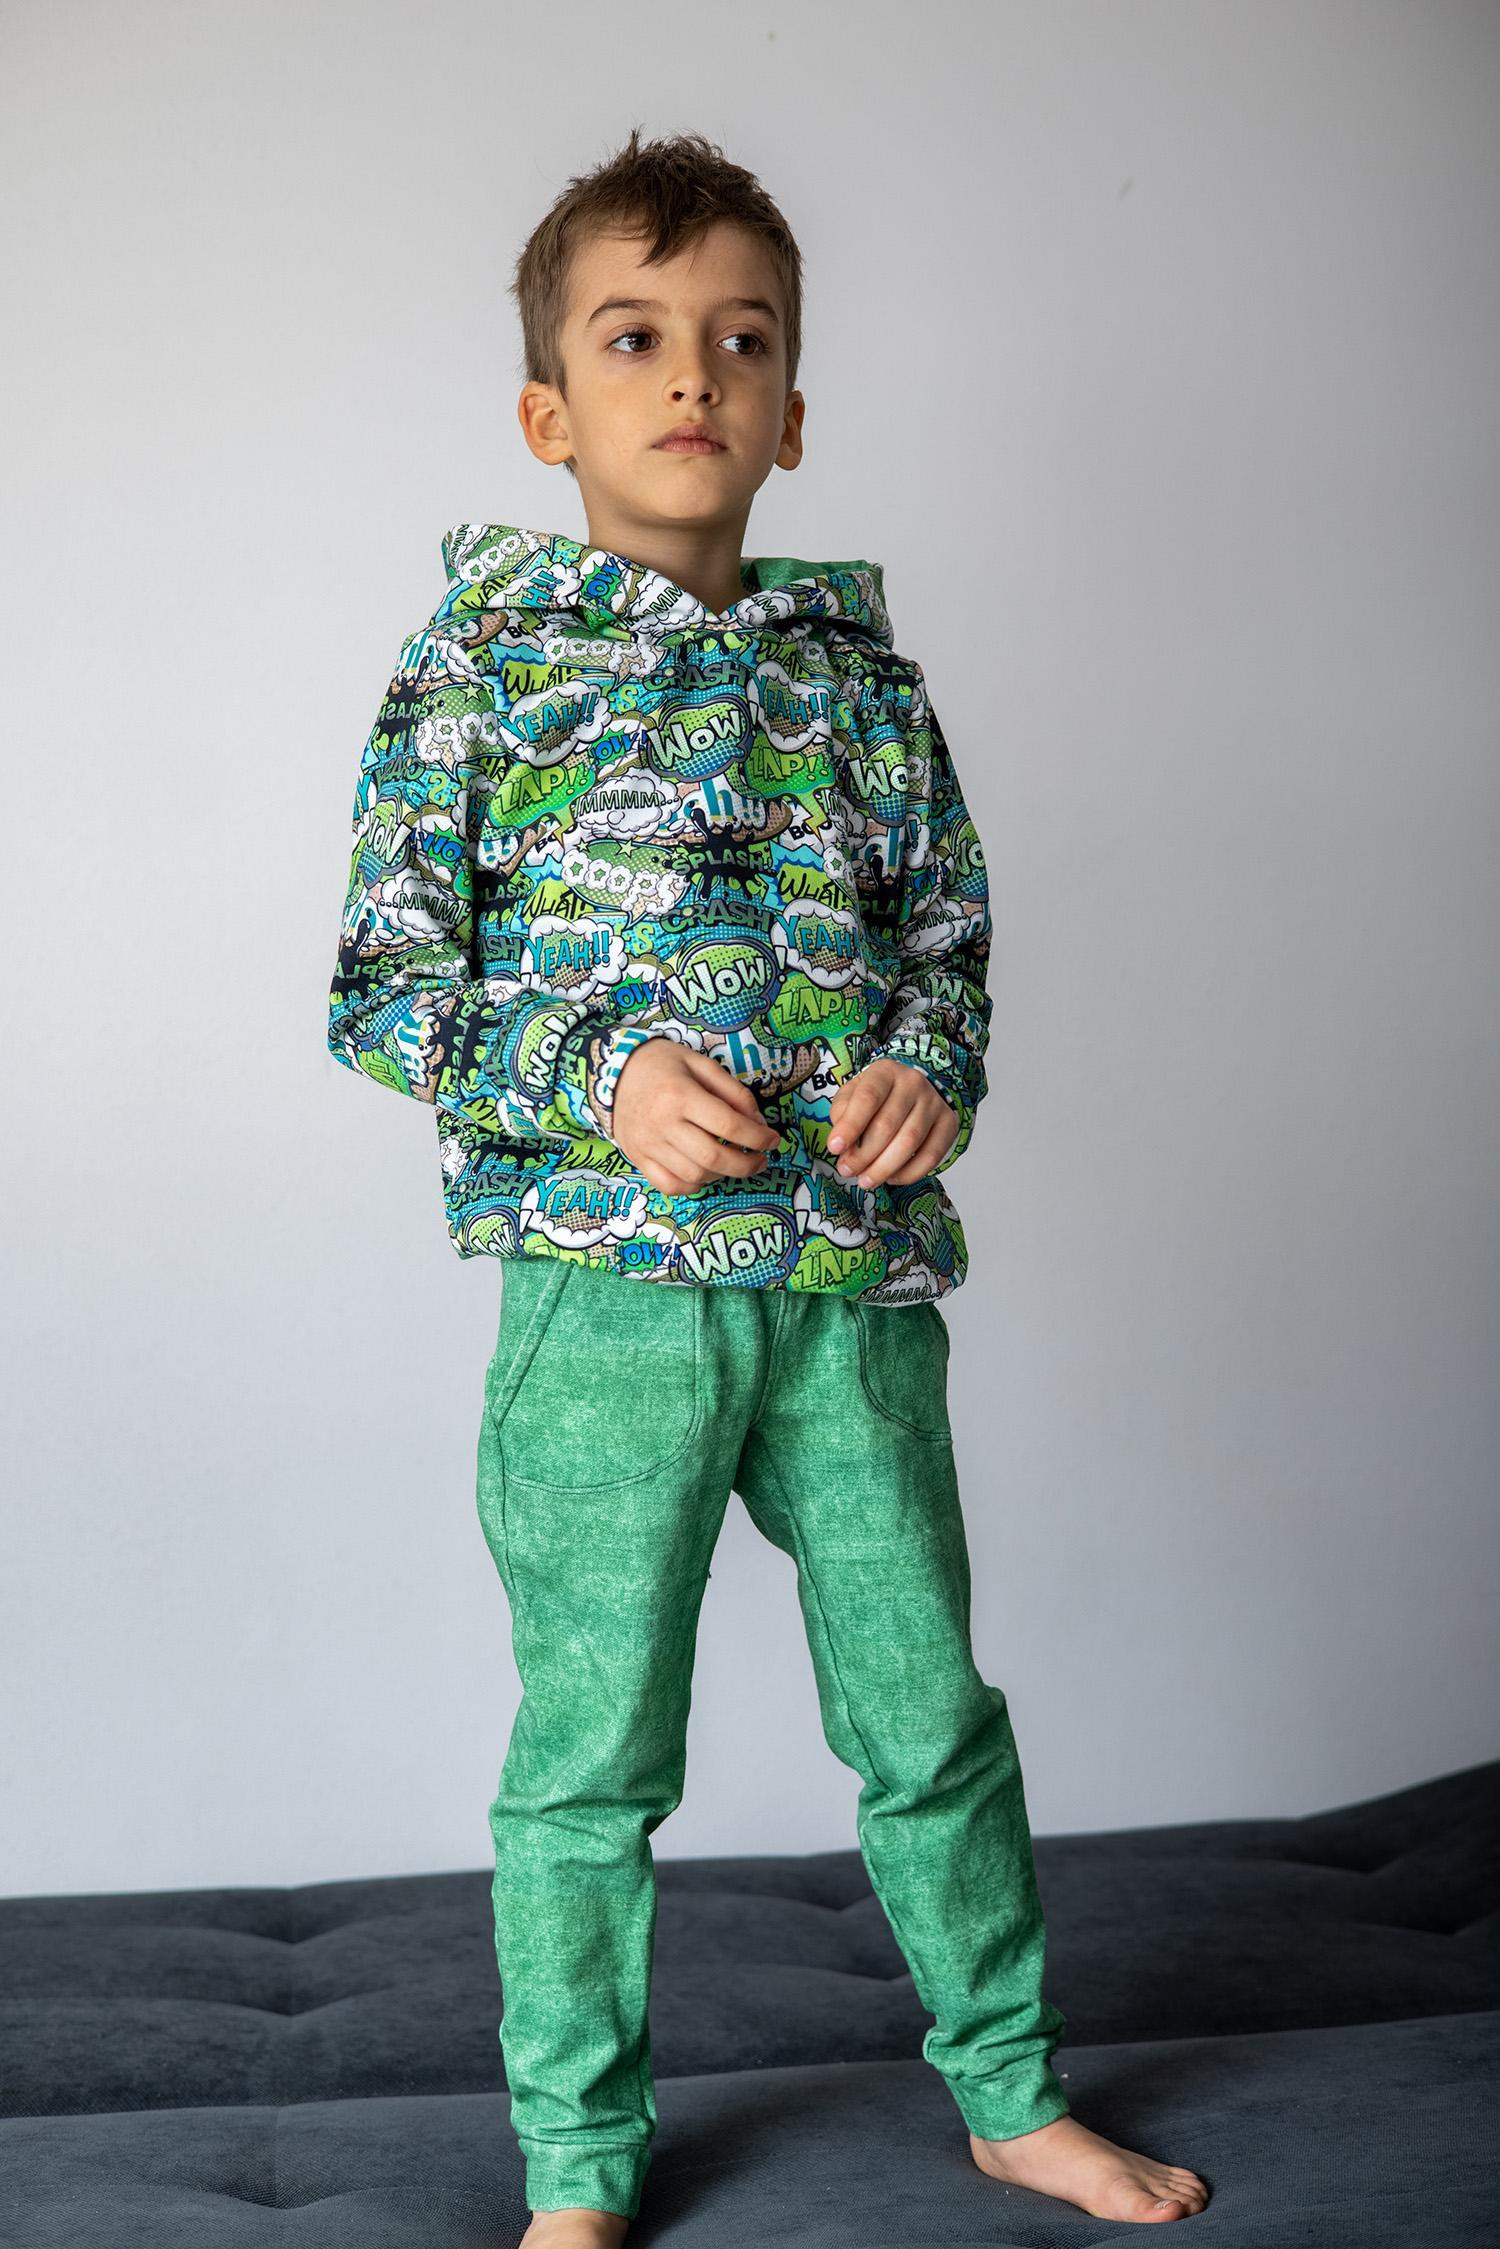 Children's tracksuit (OSLO) - BE BEAUTIFUL (BE YOURSELF) / M-01 melange light grey - looped knit fabric 